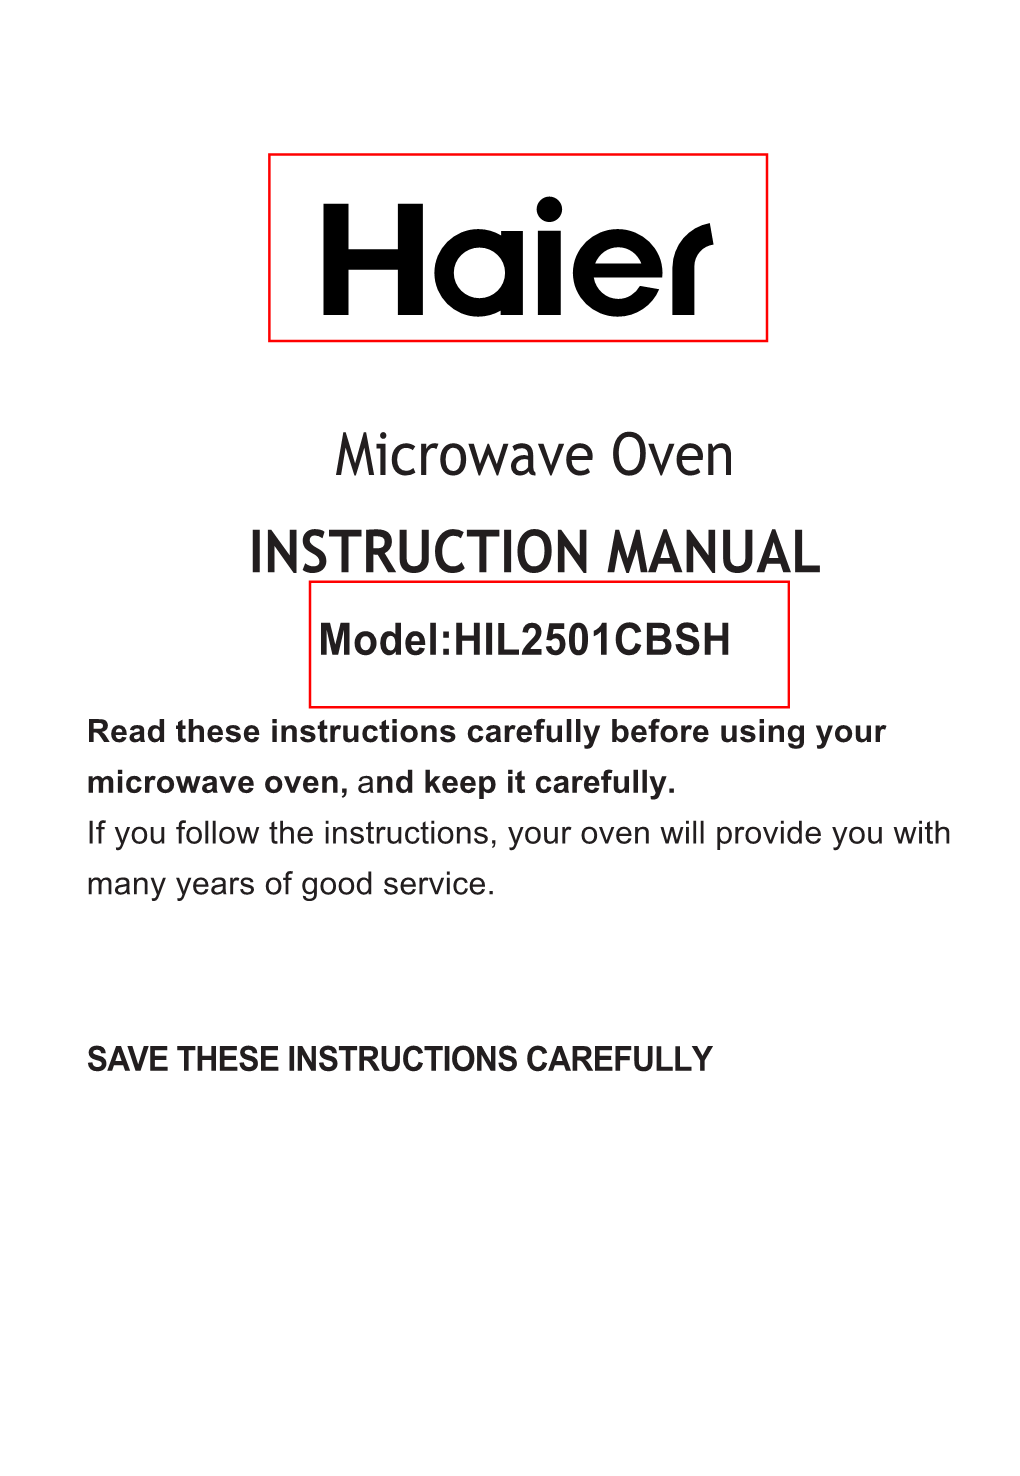 INSTRUCTION MANUAL Microwave Oven